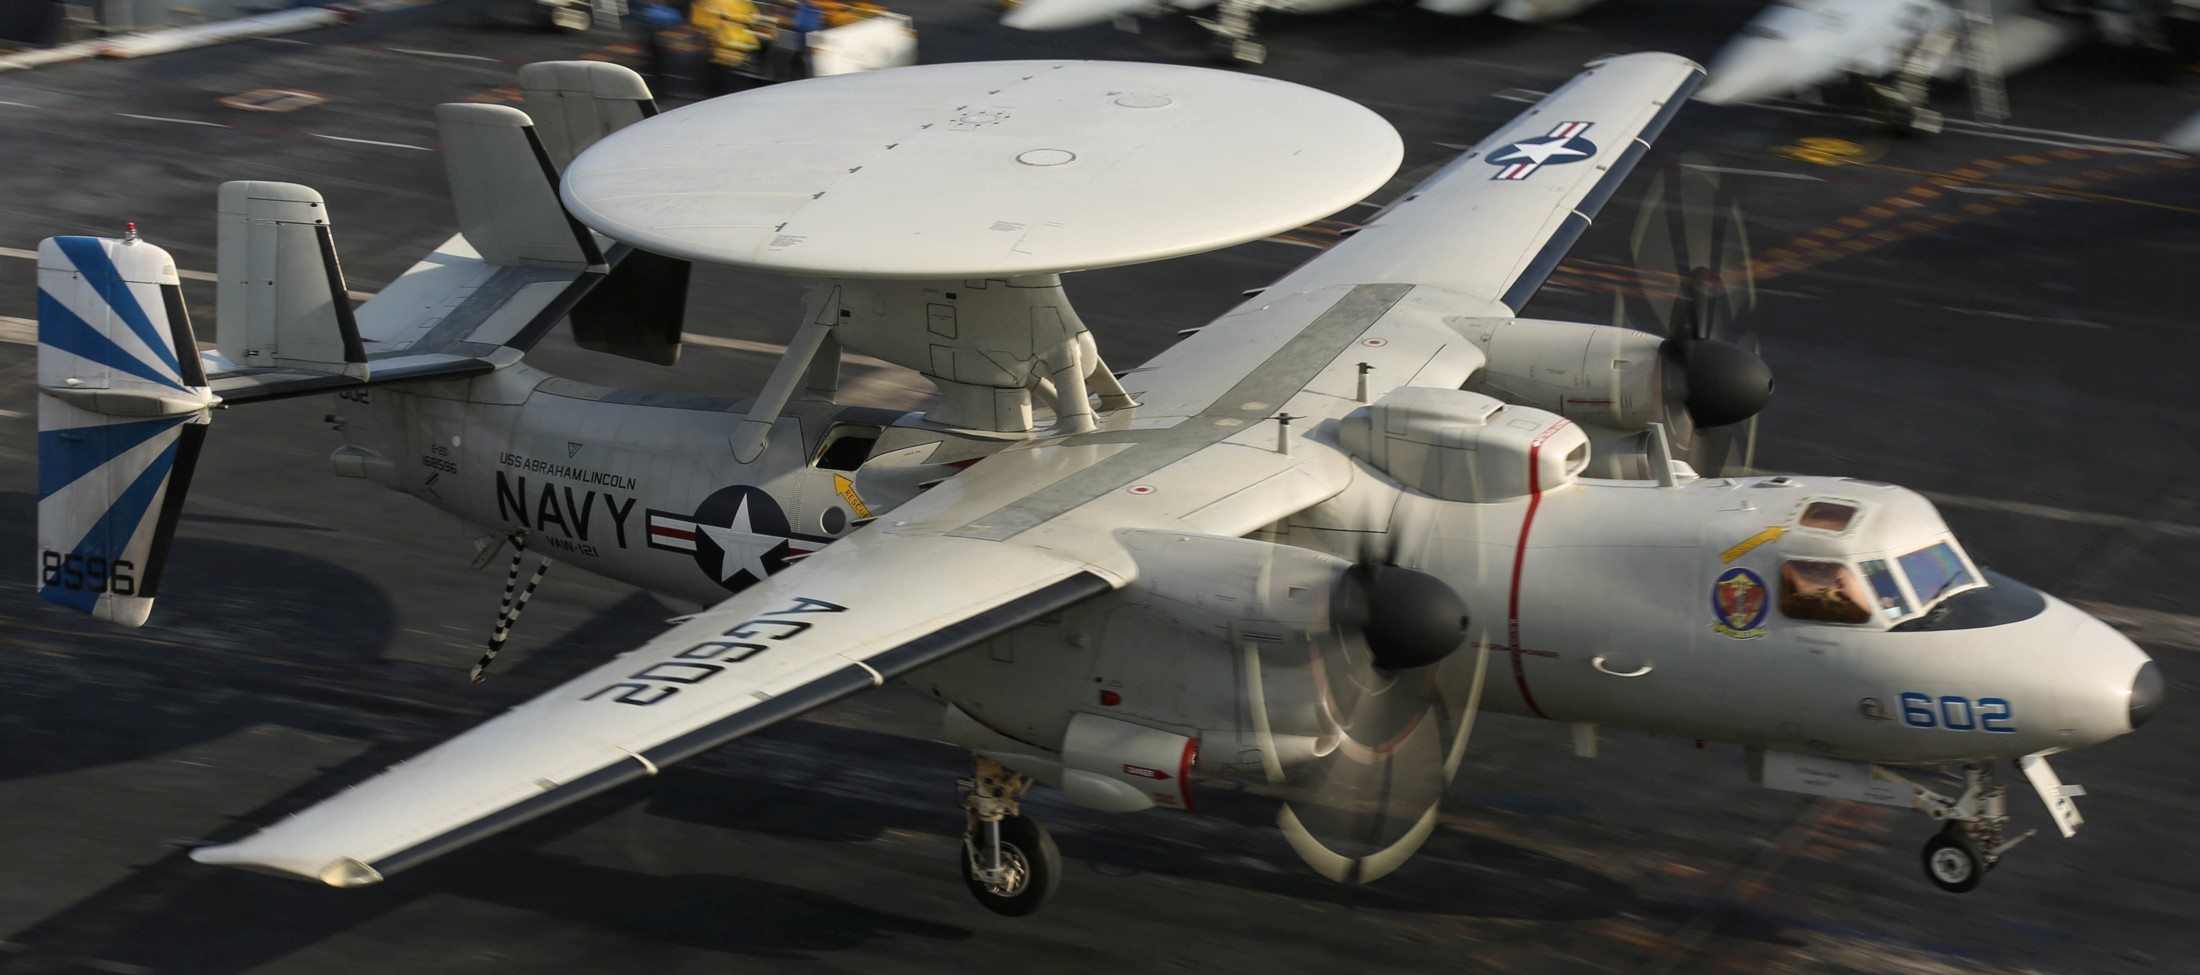 vaw-121 bluetails airborne command and control squadron us navy e-2d advanced hawkeye cvw-7 uss abraham lincoln cvn-72 61